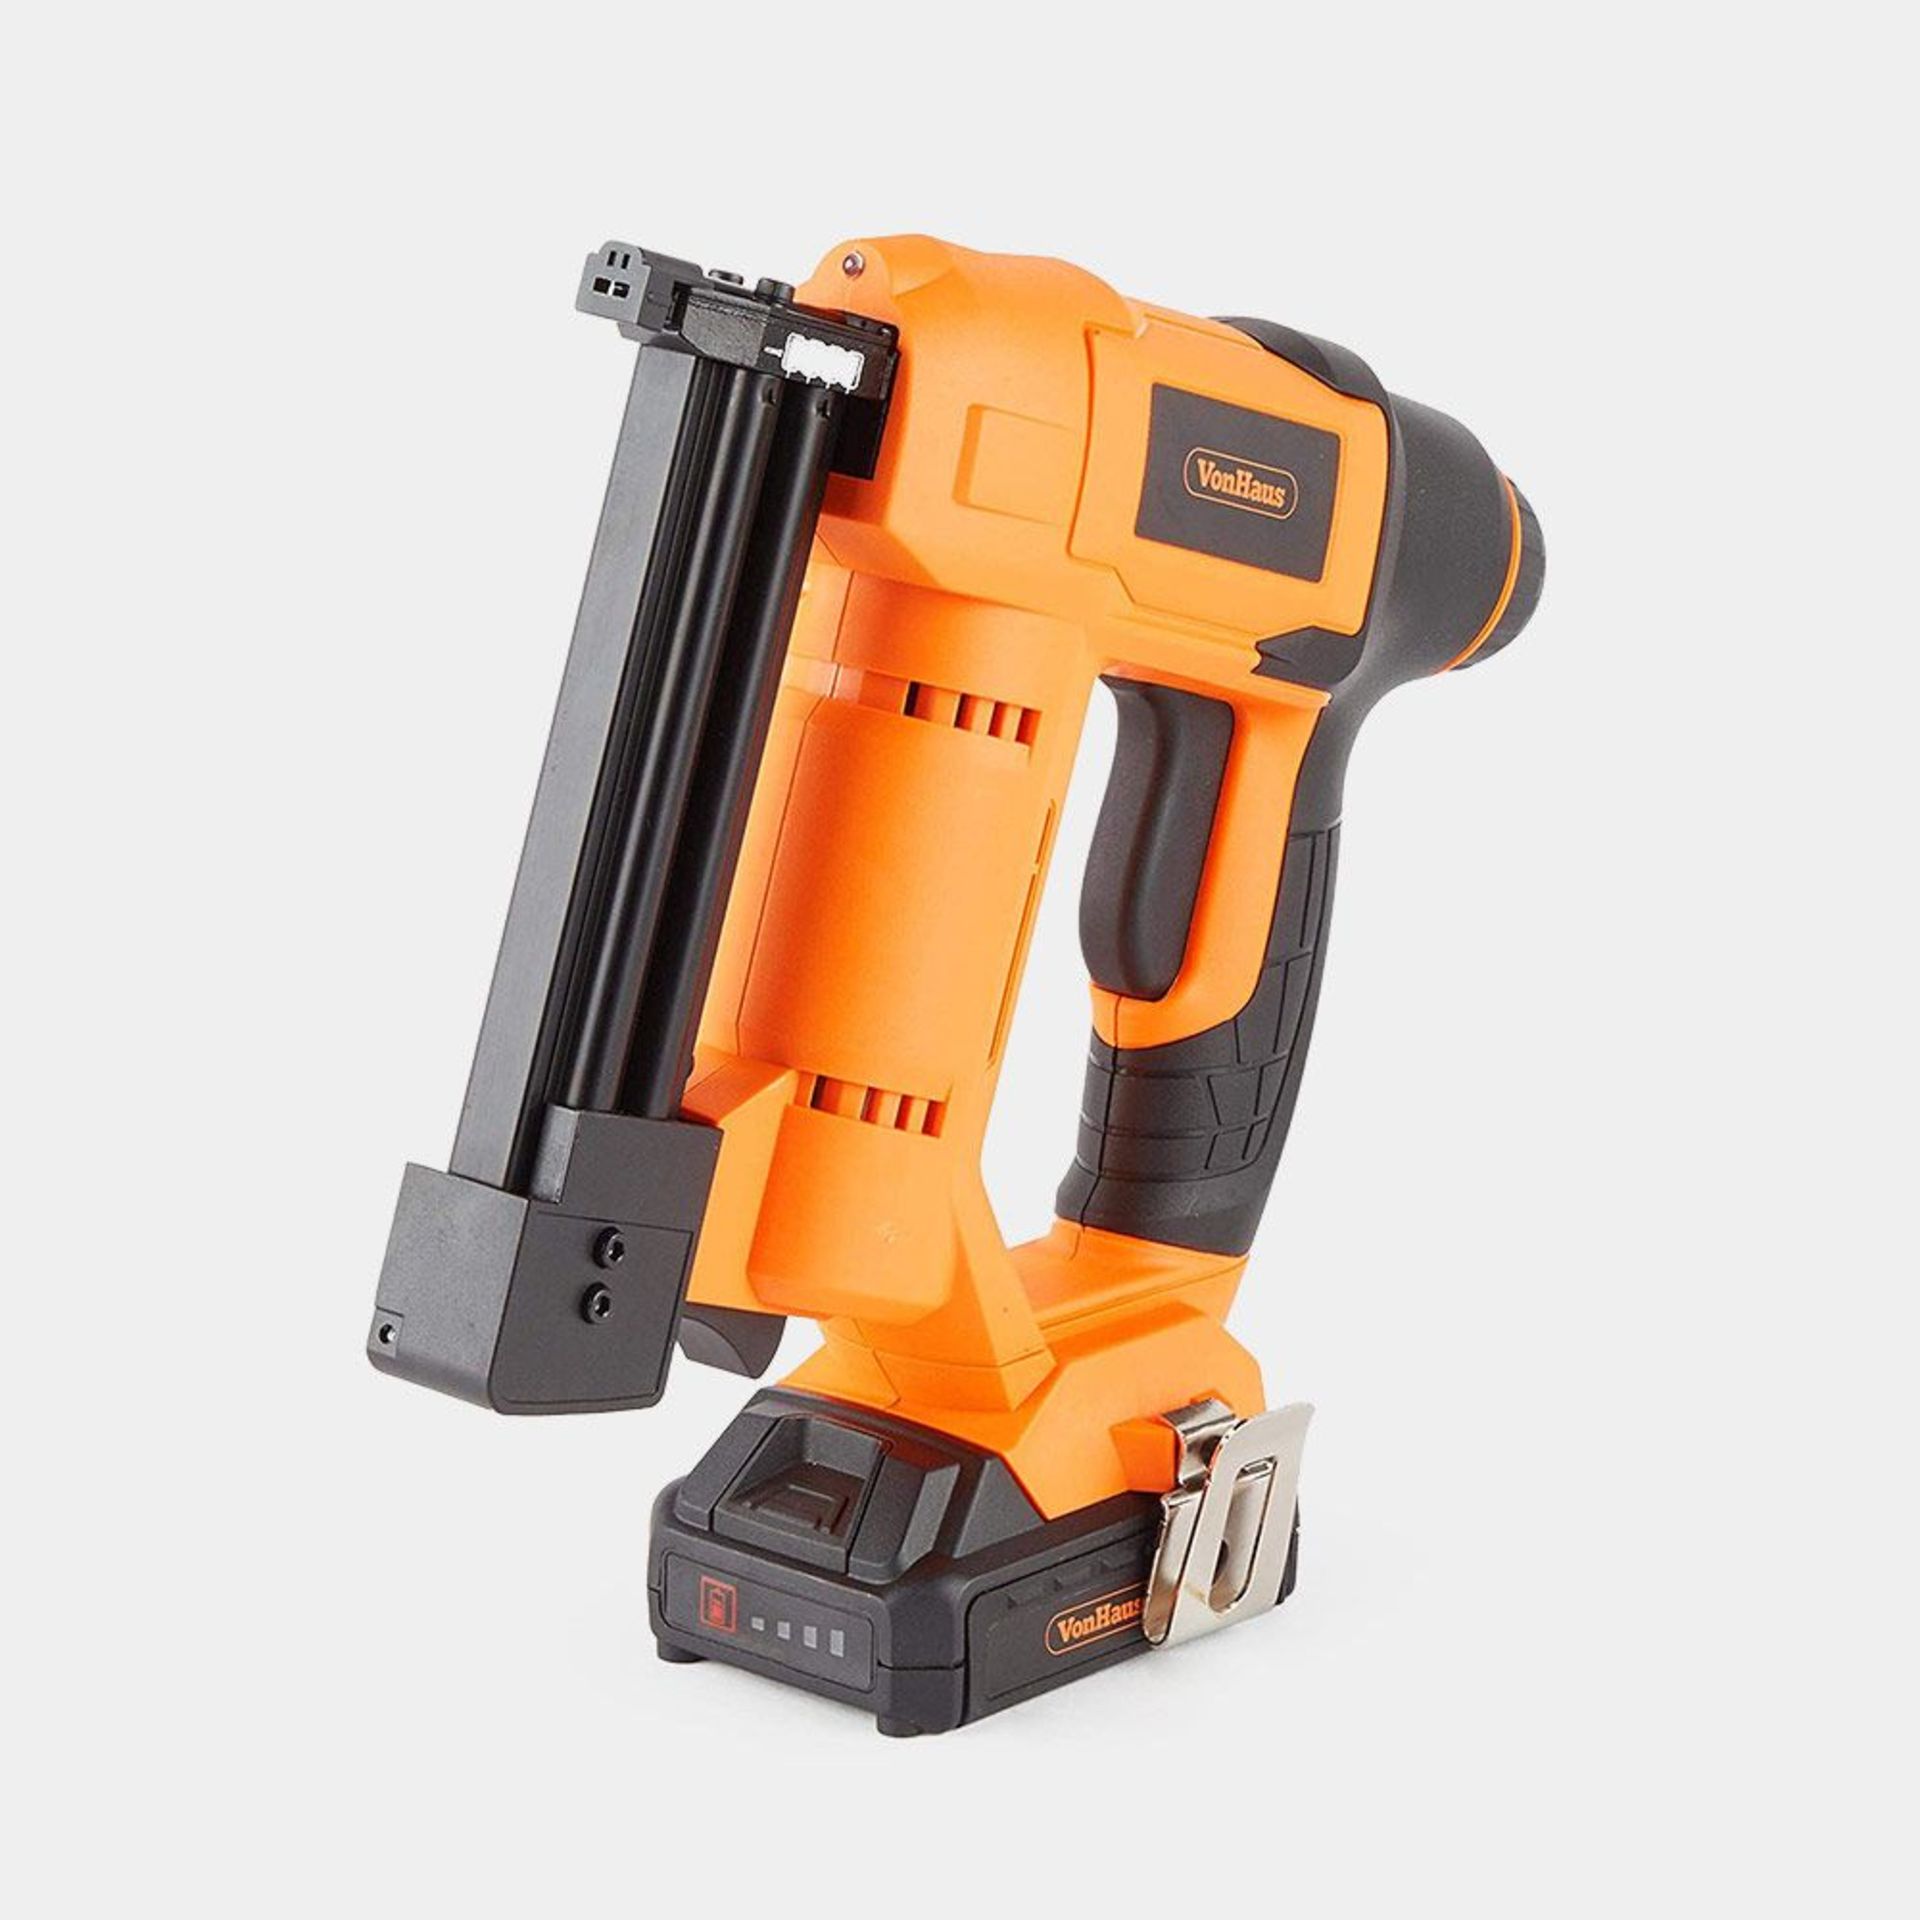 18V Cordless Nail & Staple Gun. - BI. Because it’s cordless, it’s easy to use in locations where